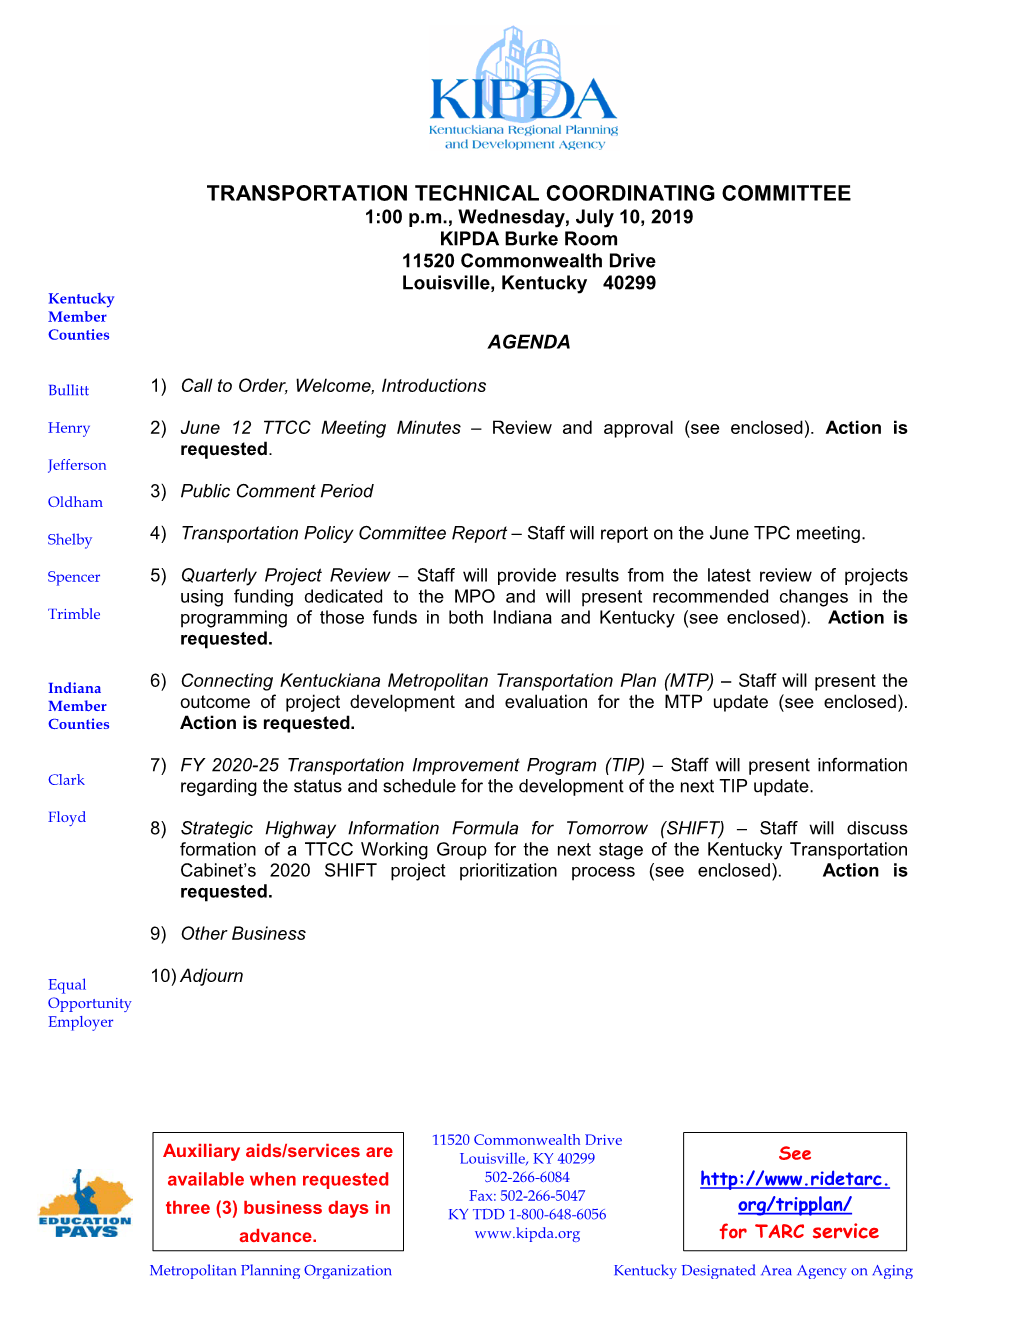 Transportation Technical Coordinating Committee Meeting Packet for July